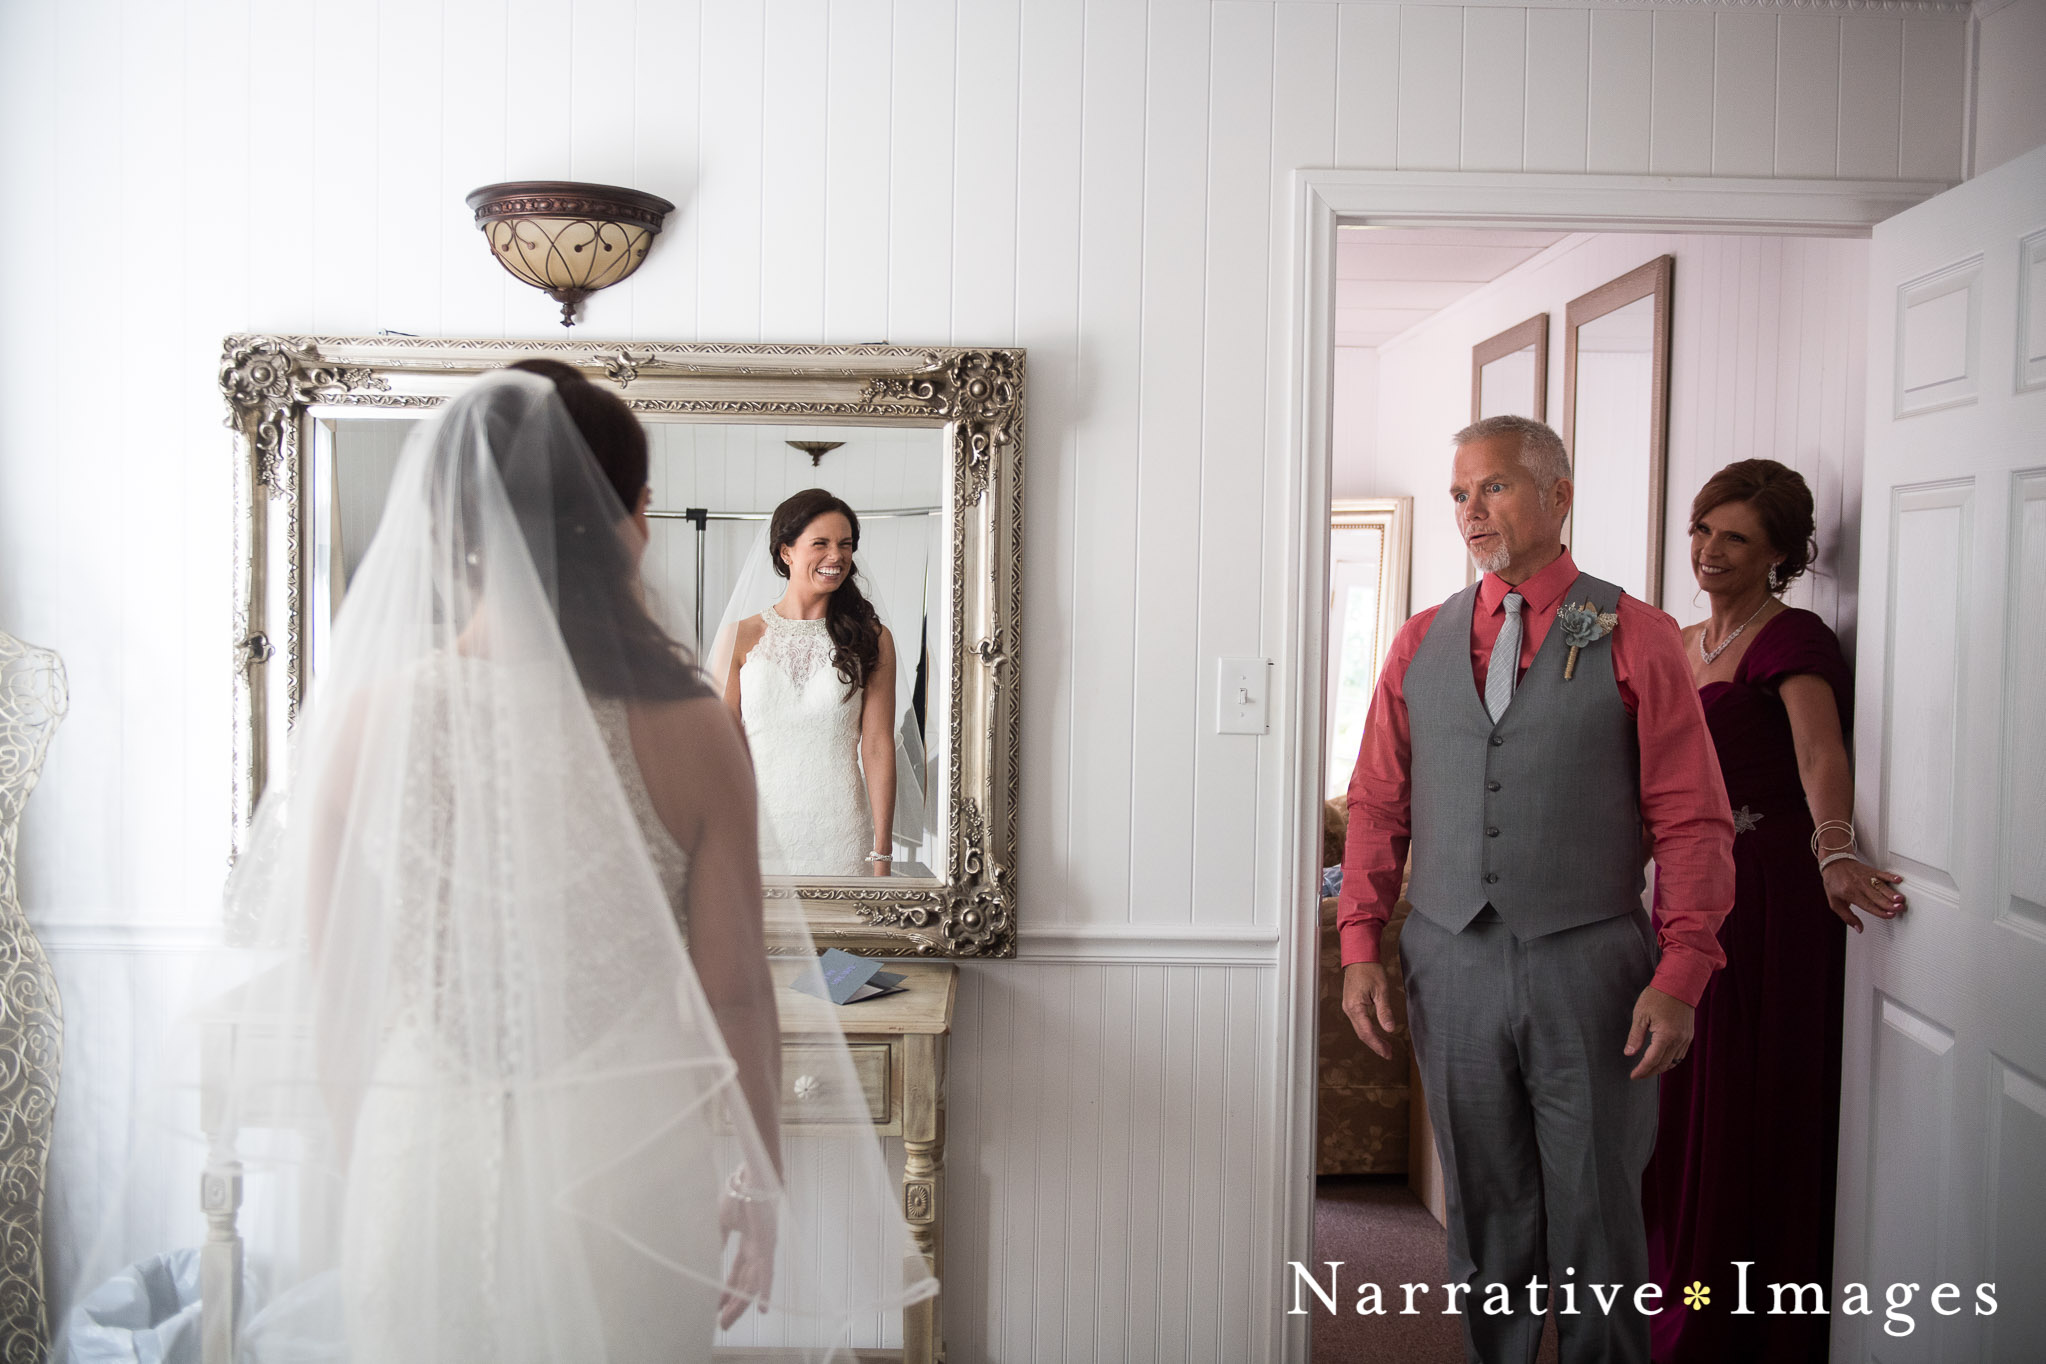 The father of the bride sees his daughter in her wedding dress on their wedding day